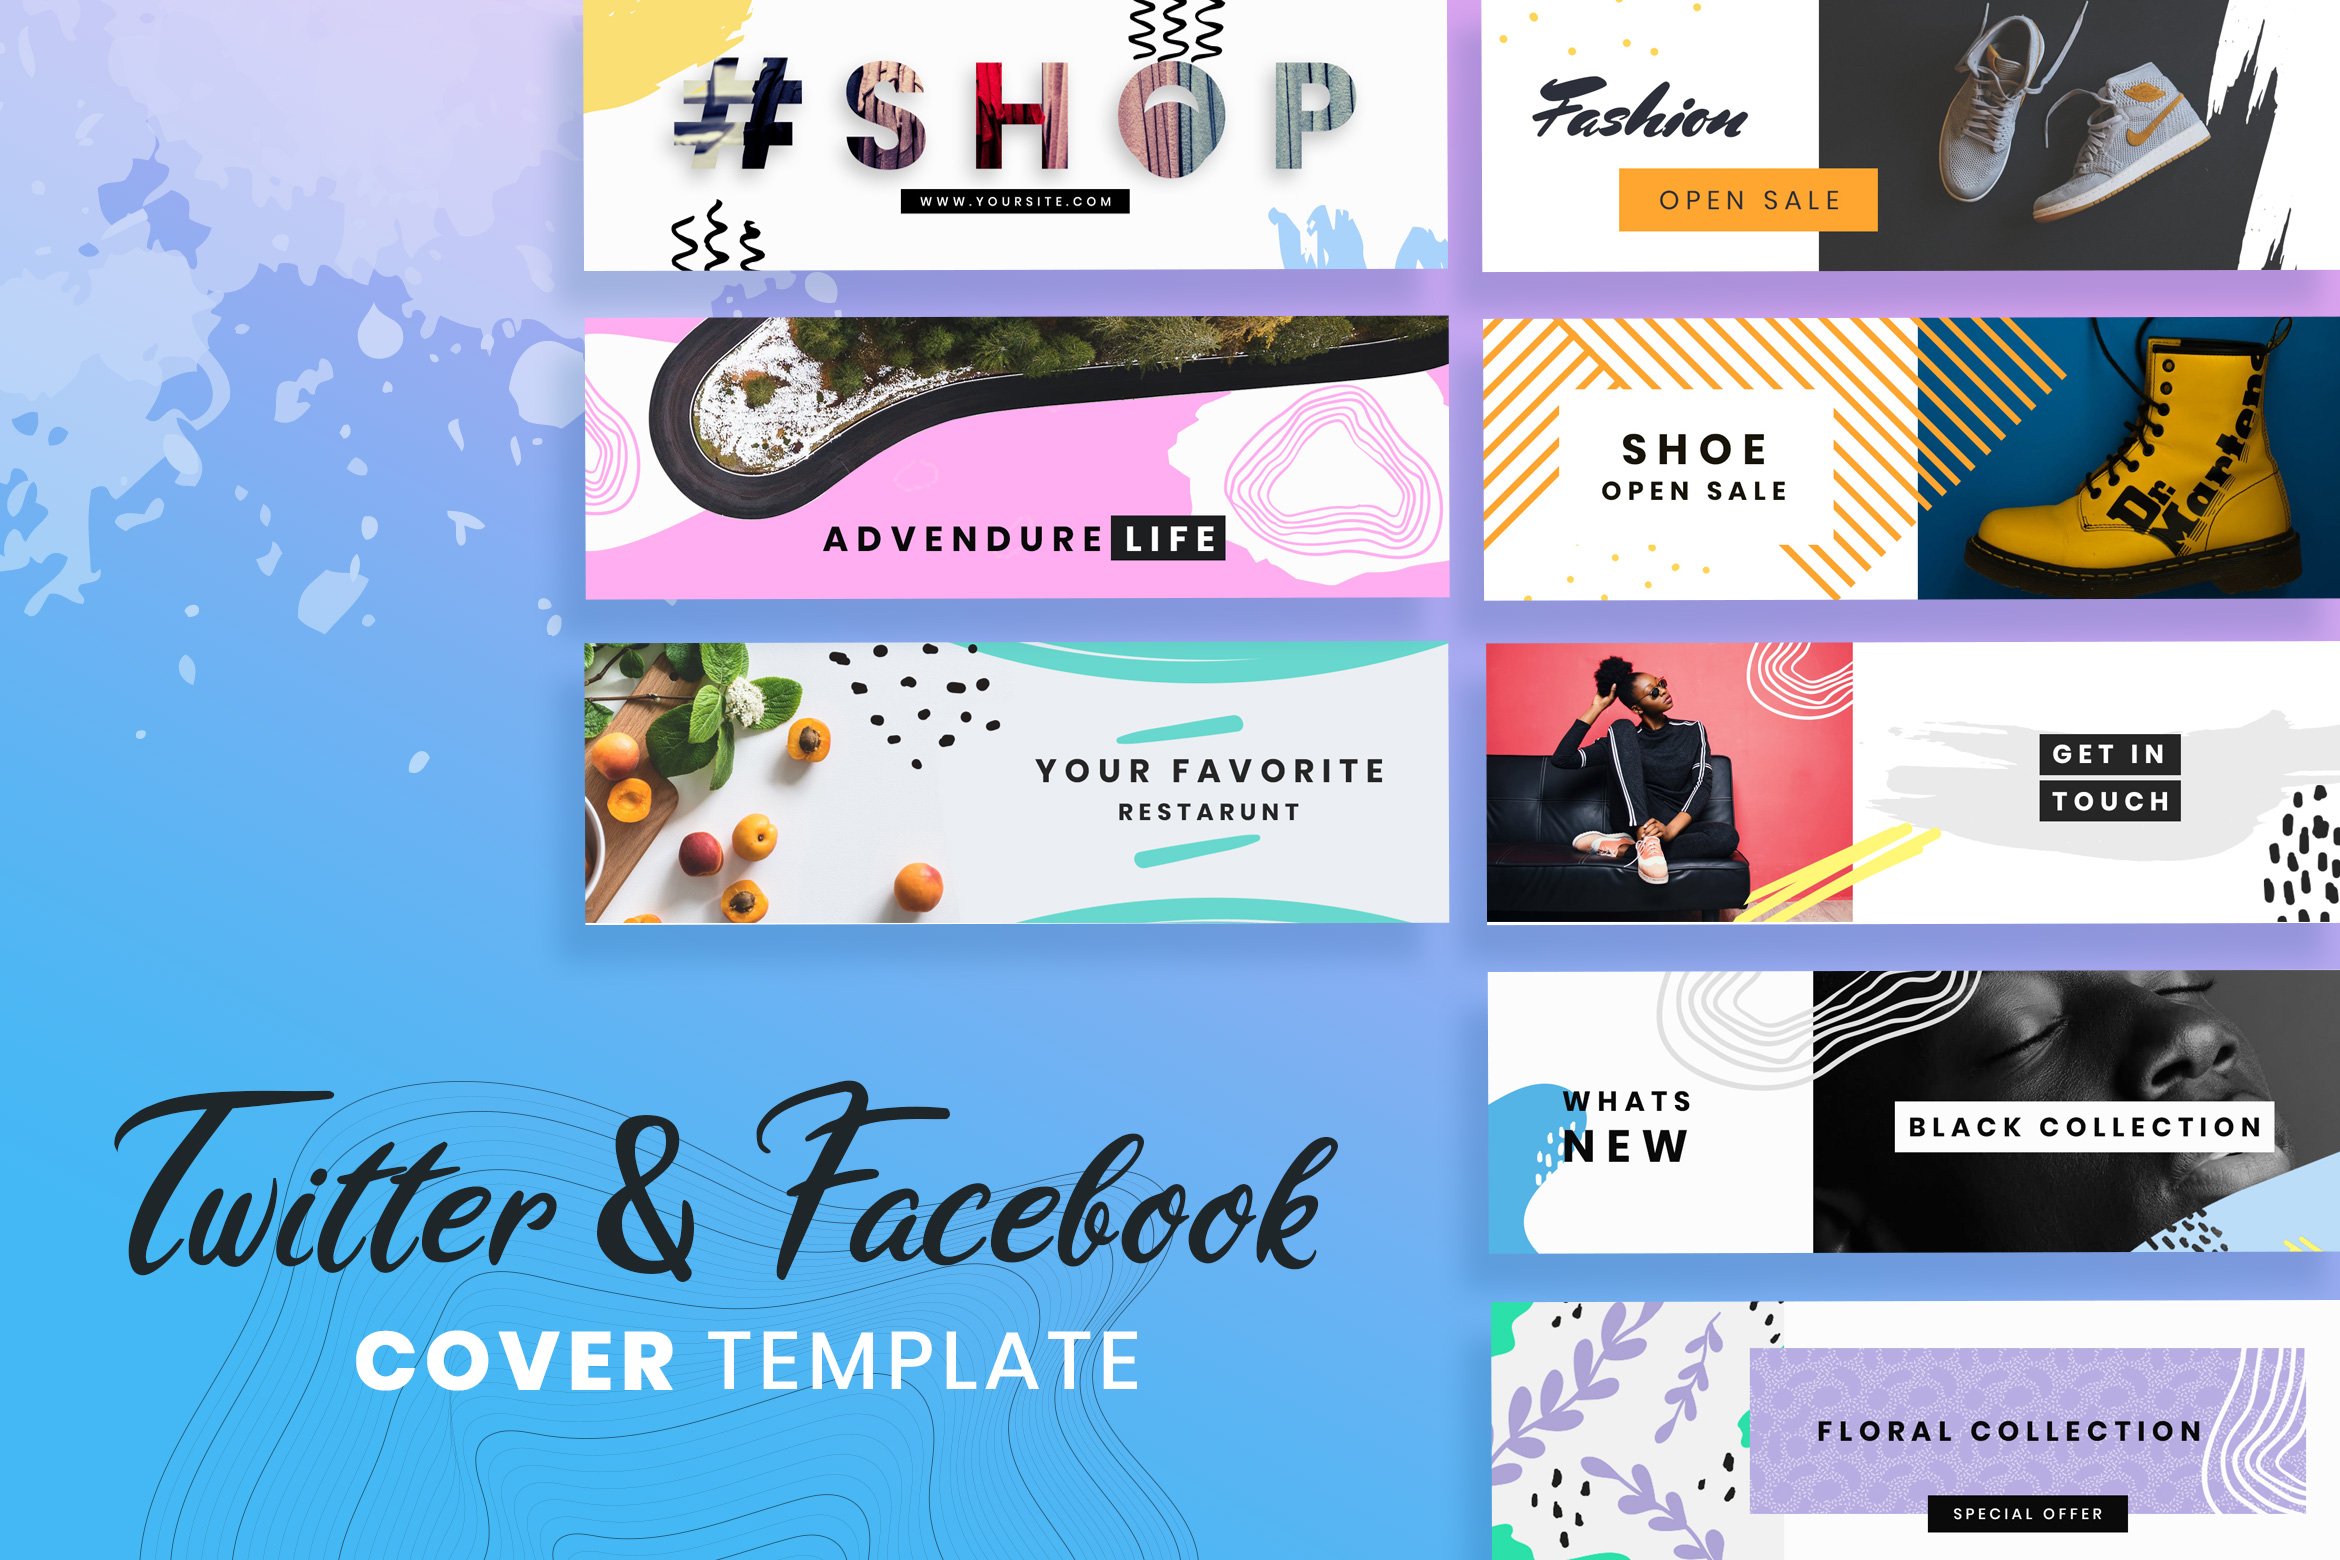 Facebook & Twitter Cover Templates